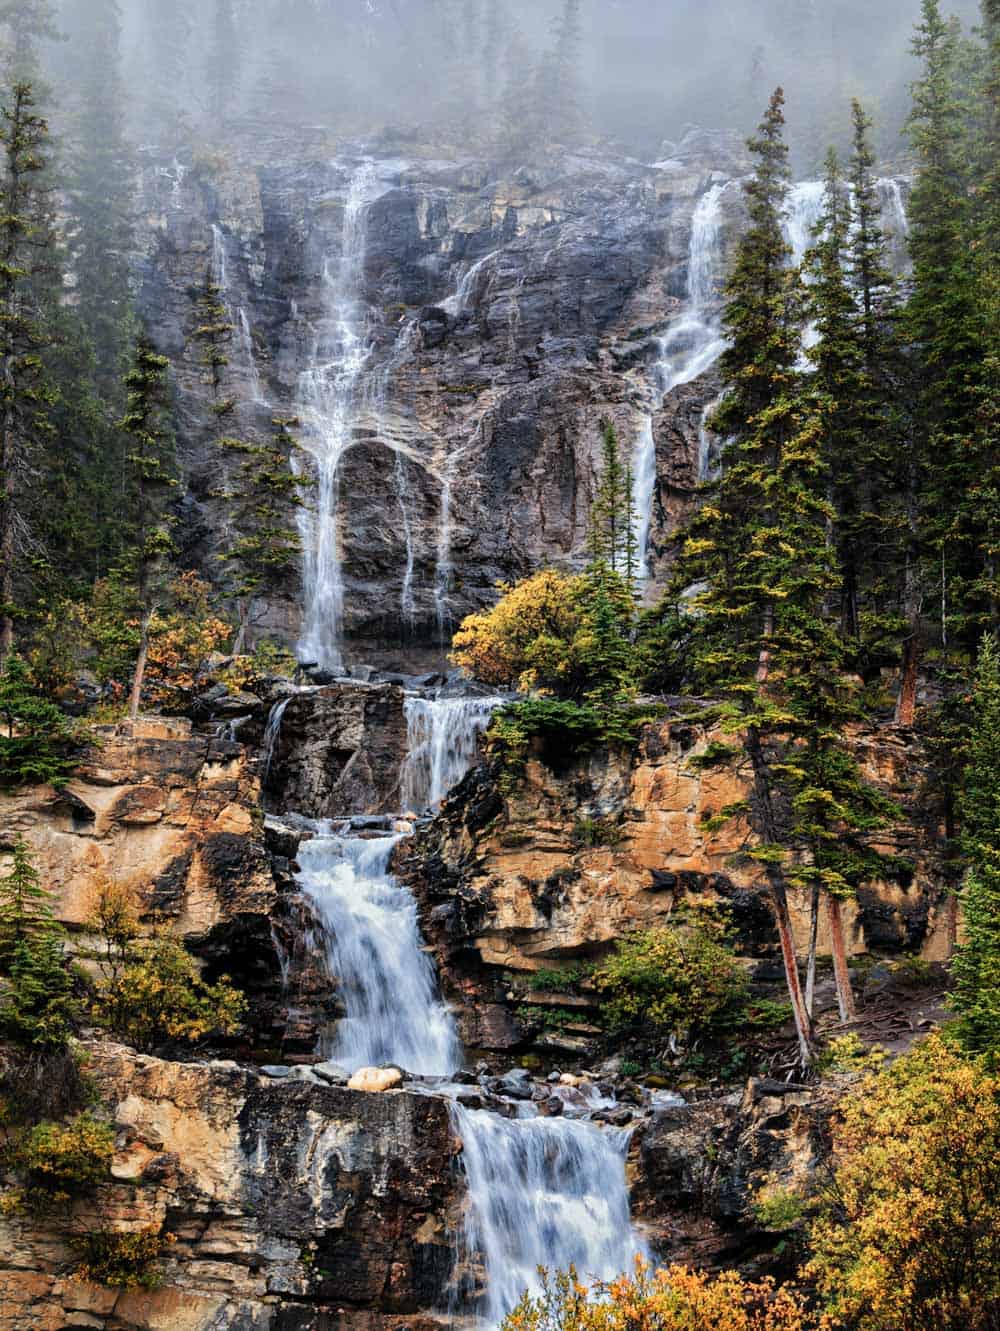 Tangle falls in Banff National Park